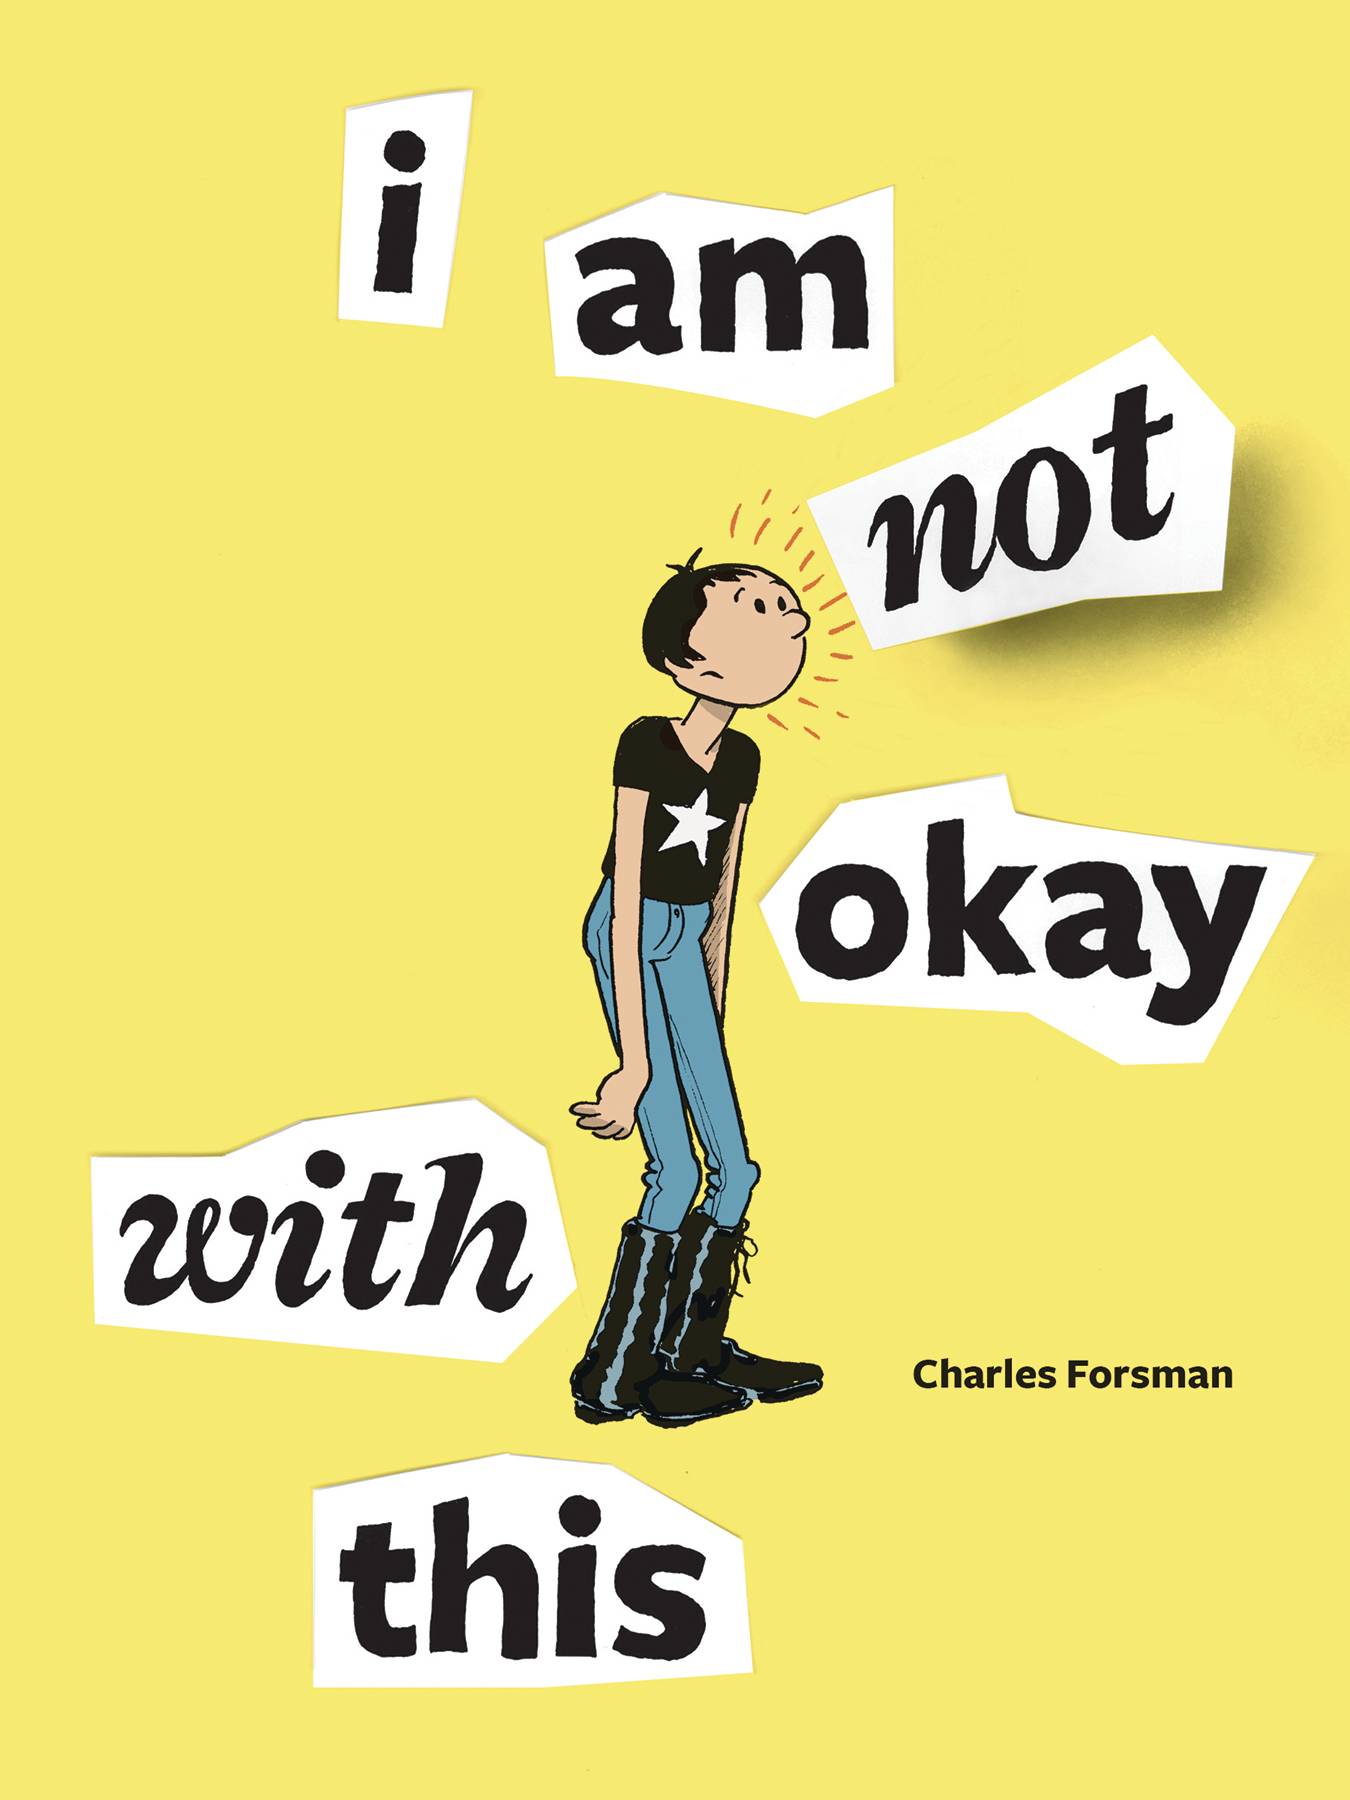 I Am Not Okay With This by Charles Forsman